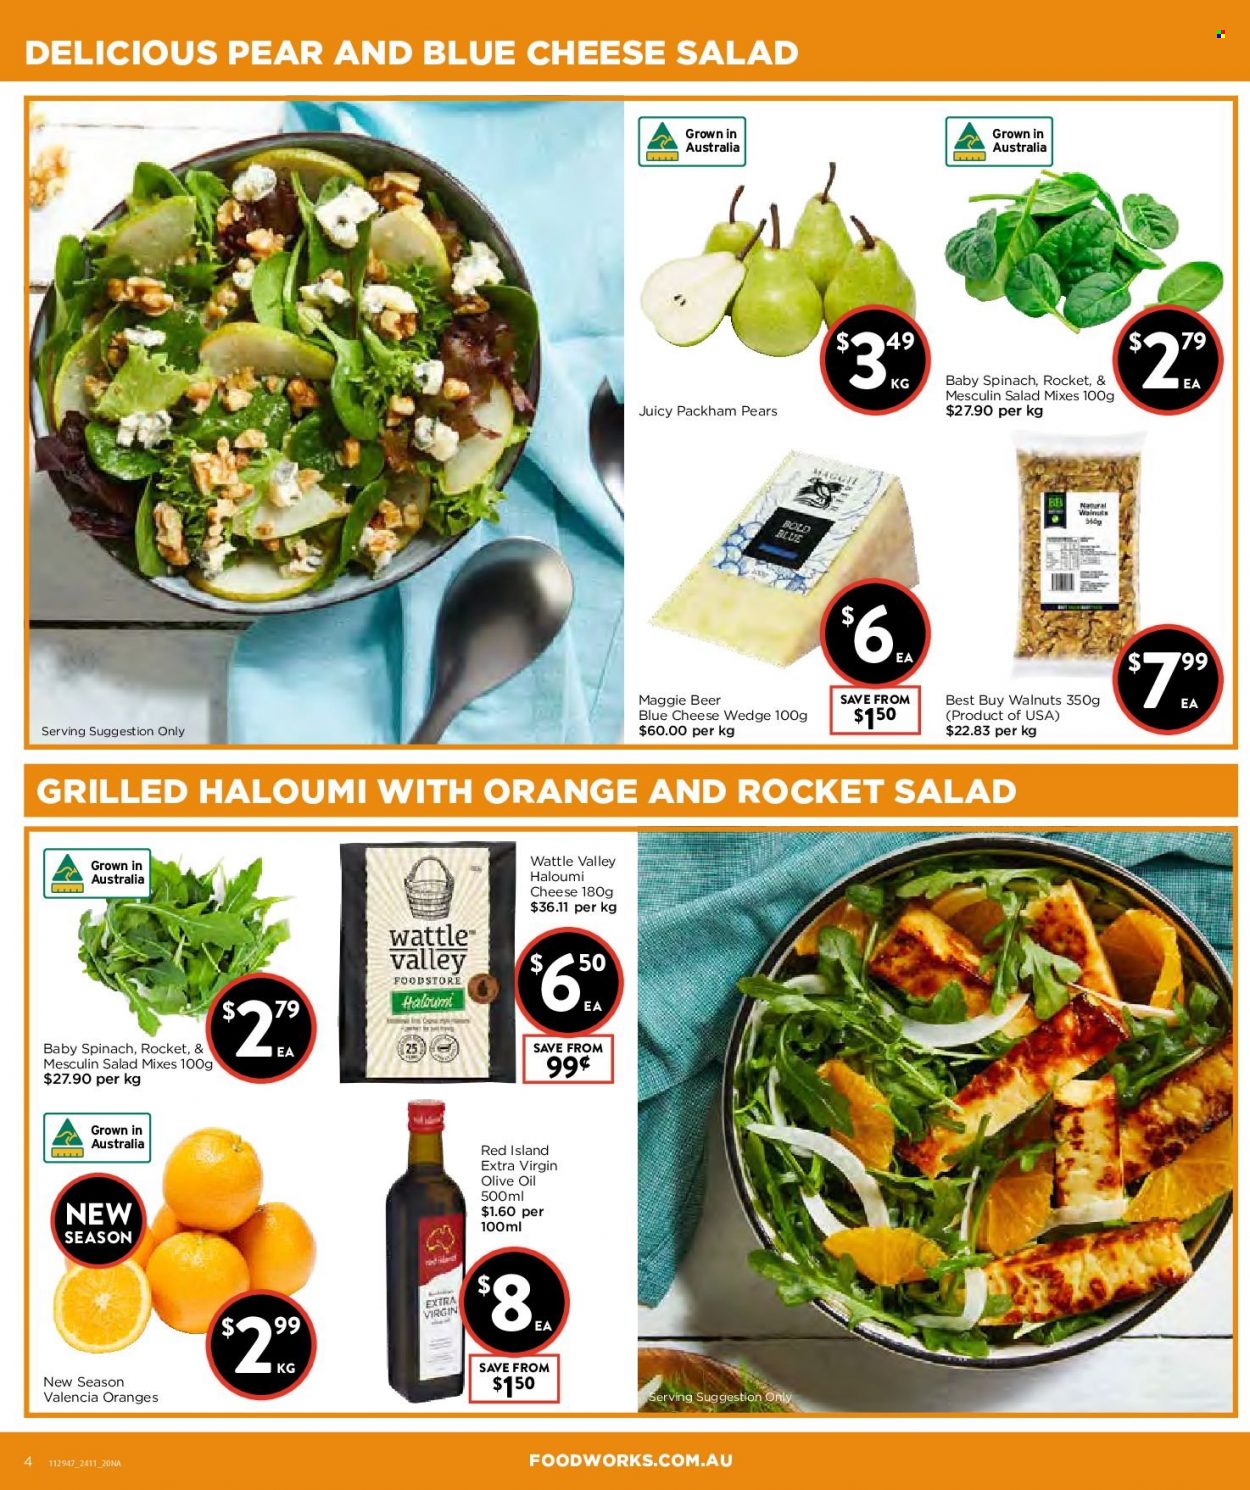 thumbnail - Foodworks Catalogue - 24 Nov 2021 - 30 Nov 2021 - Sales products - spinach, salad, pears, oranges, blue cheese, cheese, extra virgin olive oil, olive oil, oil, walnuts, beer. Page 4.